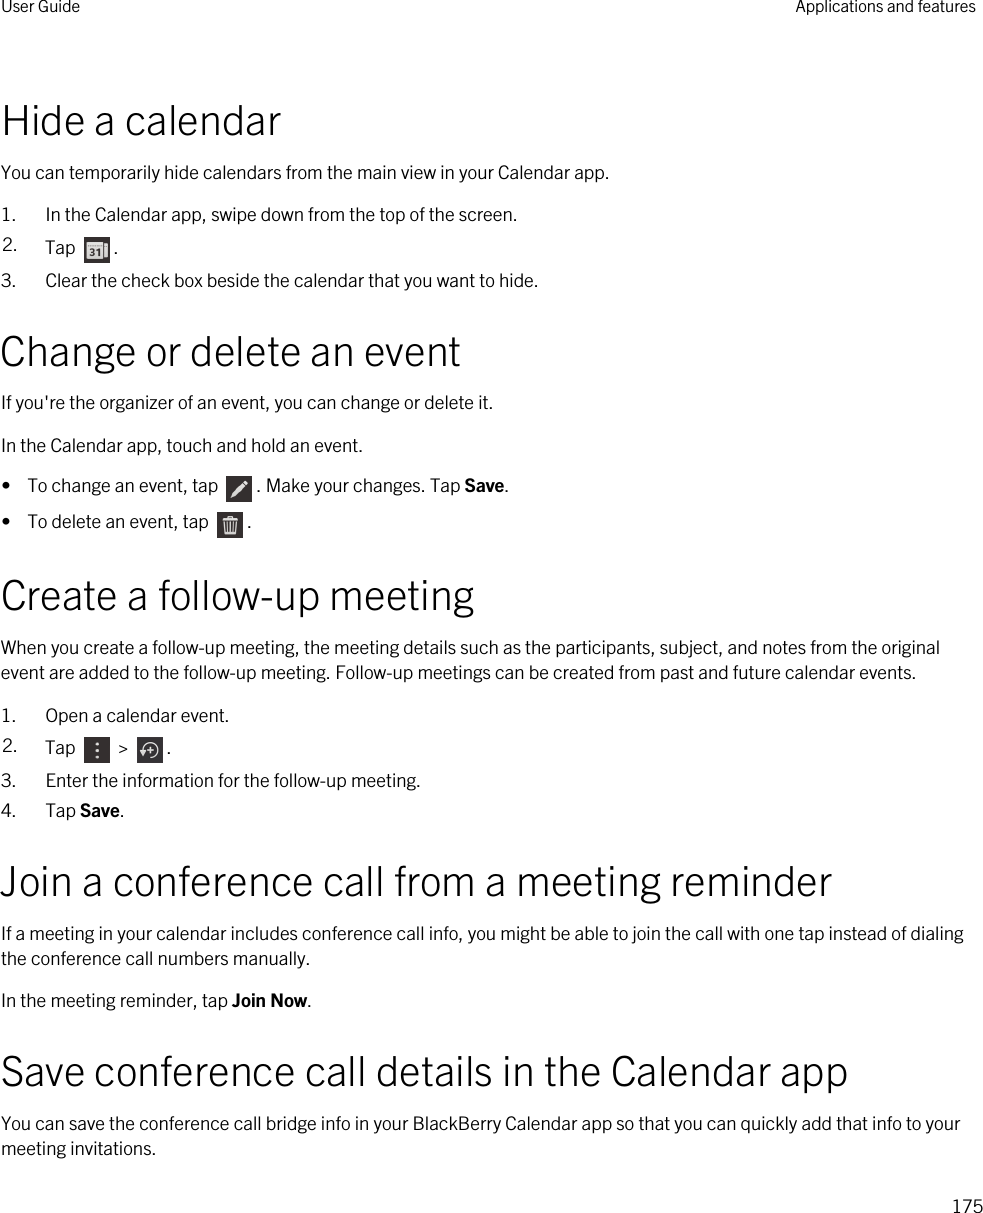 Hide a calendarYou can temporarily hide calendars from the main view in your Calendar app.1. In the Calendar app, swipe down from the top of the screen.2. Tap  .3. Clear the check box beside the calendar that you want to hide.Change or delete an eventIf you&apos;re the organizer of an event, you can change or delete it.In the Calendar app, touch and hold an event.•  To change an event, tap  . Make your changes. Tap Save.•  To delete an event, tap  .Create a follow-up meetingWhen you create a follow-up meeting, the meeting details such as the participants, subject, and notes from the original event are added to the follow-up meeting. Follow-up meetings can be created from past and future calendar events.1. Open a calendar event.2. Tap   &gt;  .3. Enter the information for the follow-up meeting.4. Tap Save.Join a conference call from a meeting reminderIf a meeting in your calendar includes conference call info, you might be able to join the call with one tap instead of dialing the conference call numbers manually.In the meeting reminder, tap Join Now.Save conference call details in the Calendar appYou can save the conference call bridge info in your BlackBerry Calendar app so that you can quickly add that info to your meeting invitations.User Guide Applications and features175